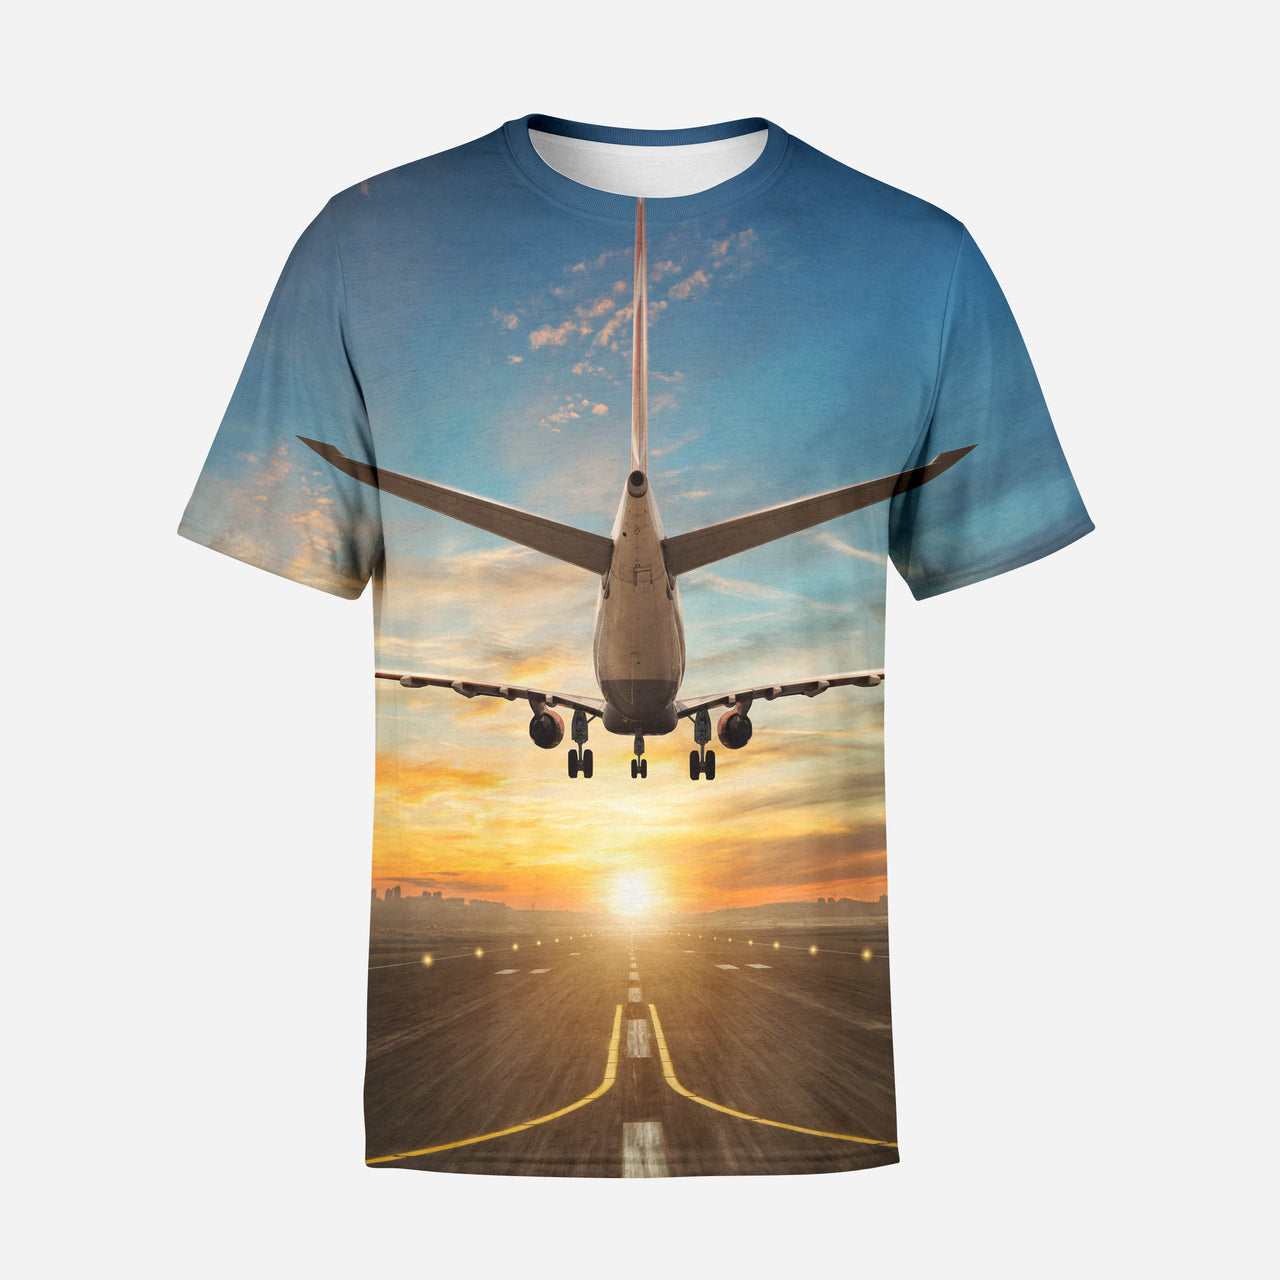 Airplane over Runway Towards the Sunrise Printed 3D T-Shirts